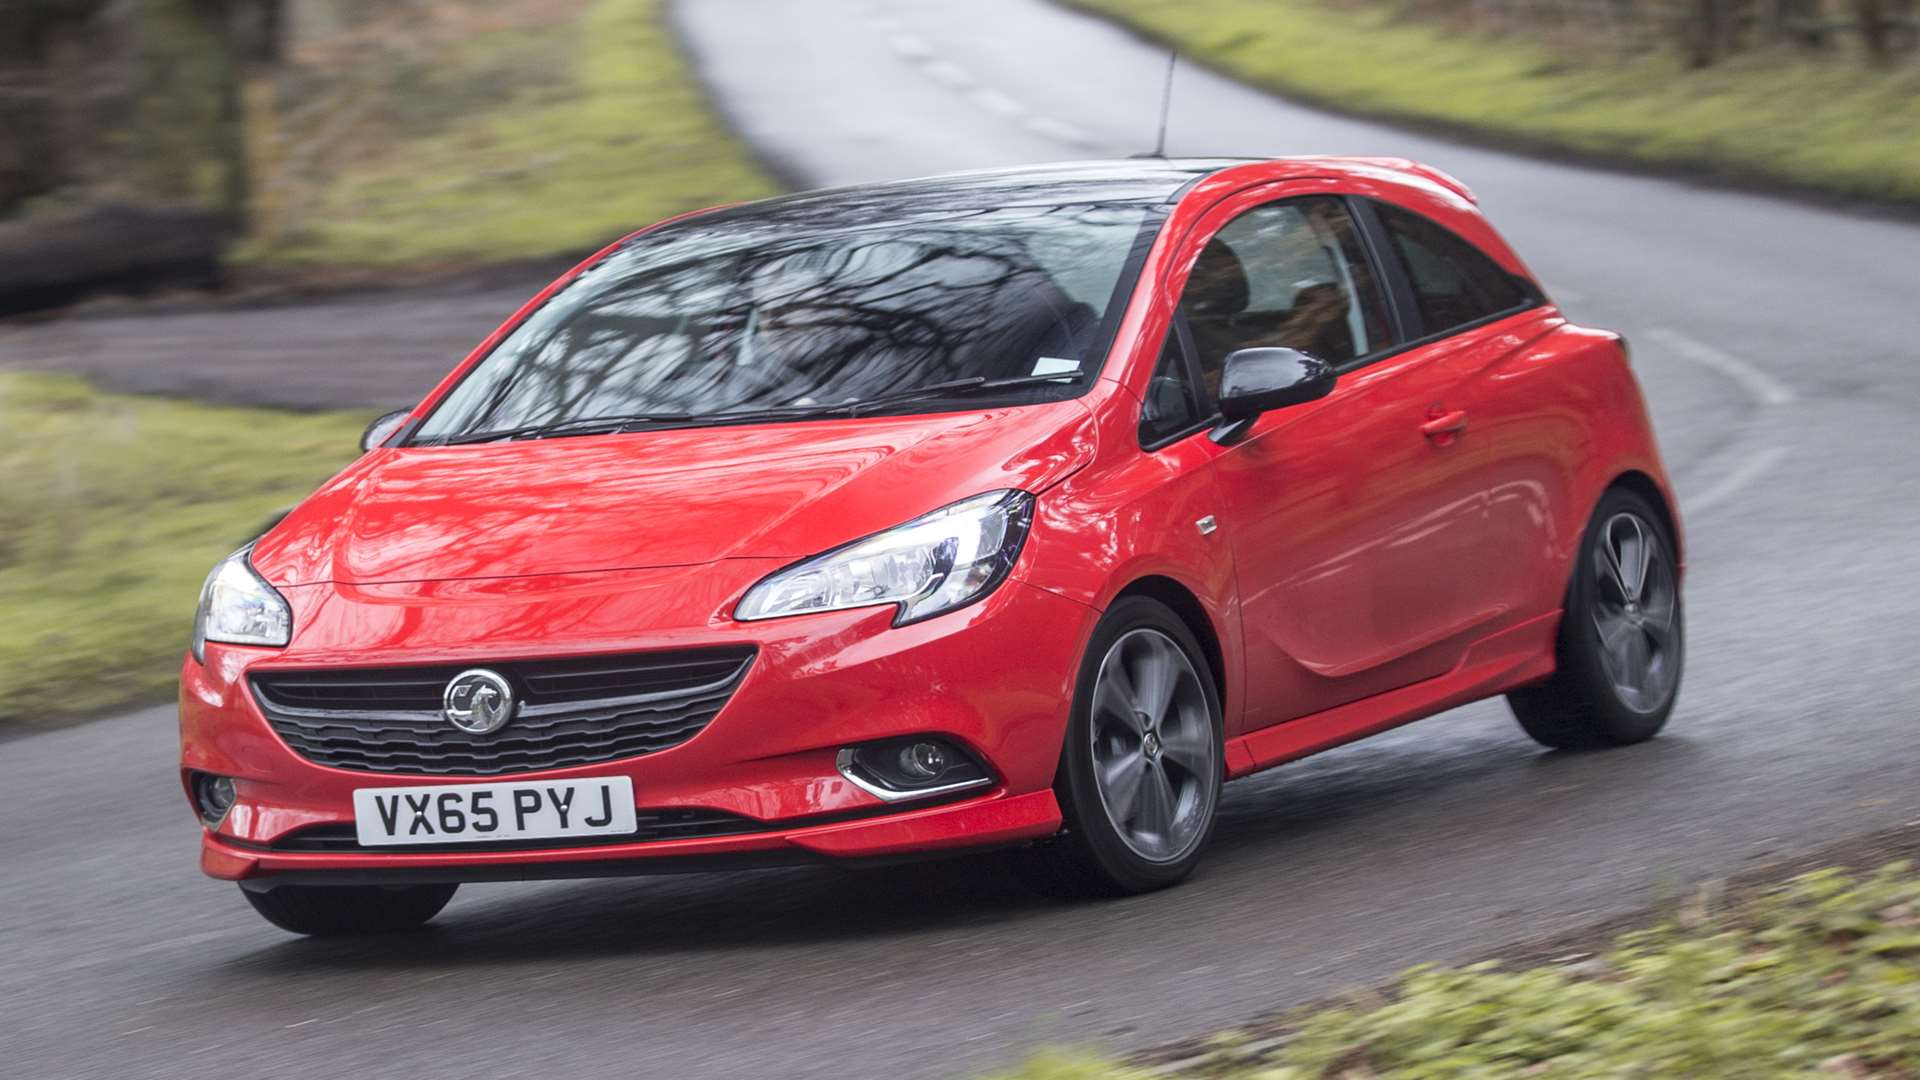 The front of the Corsa shares styling cues with the Adam